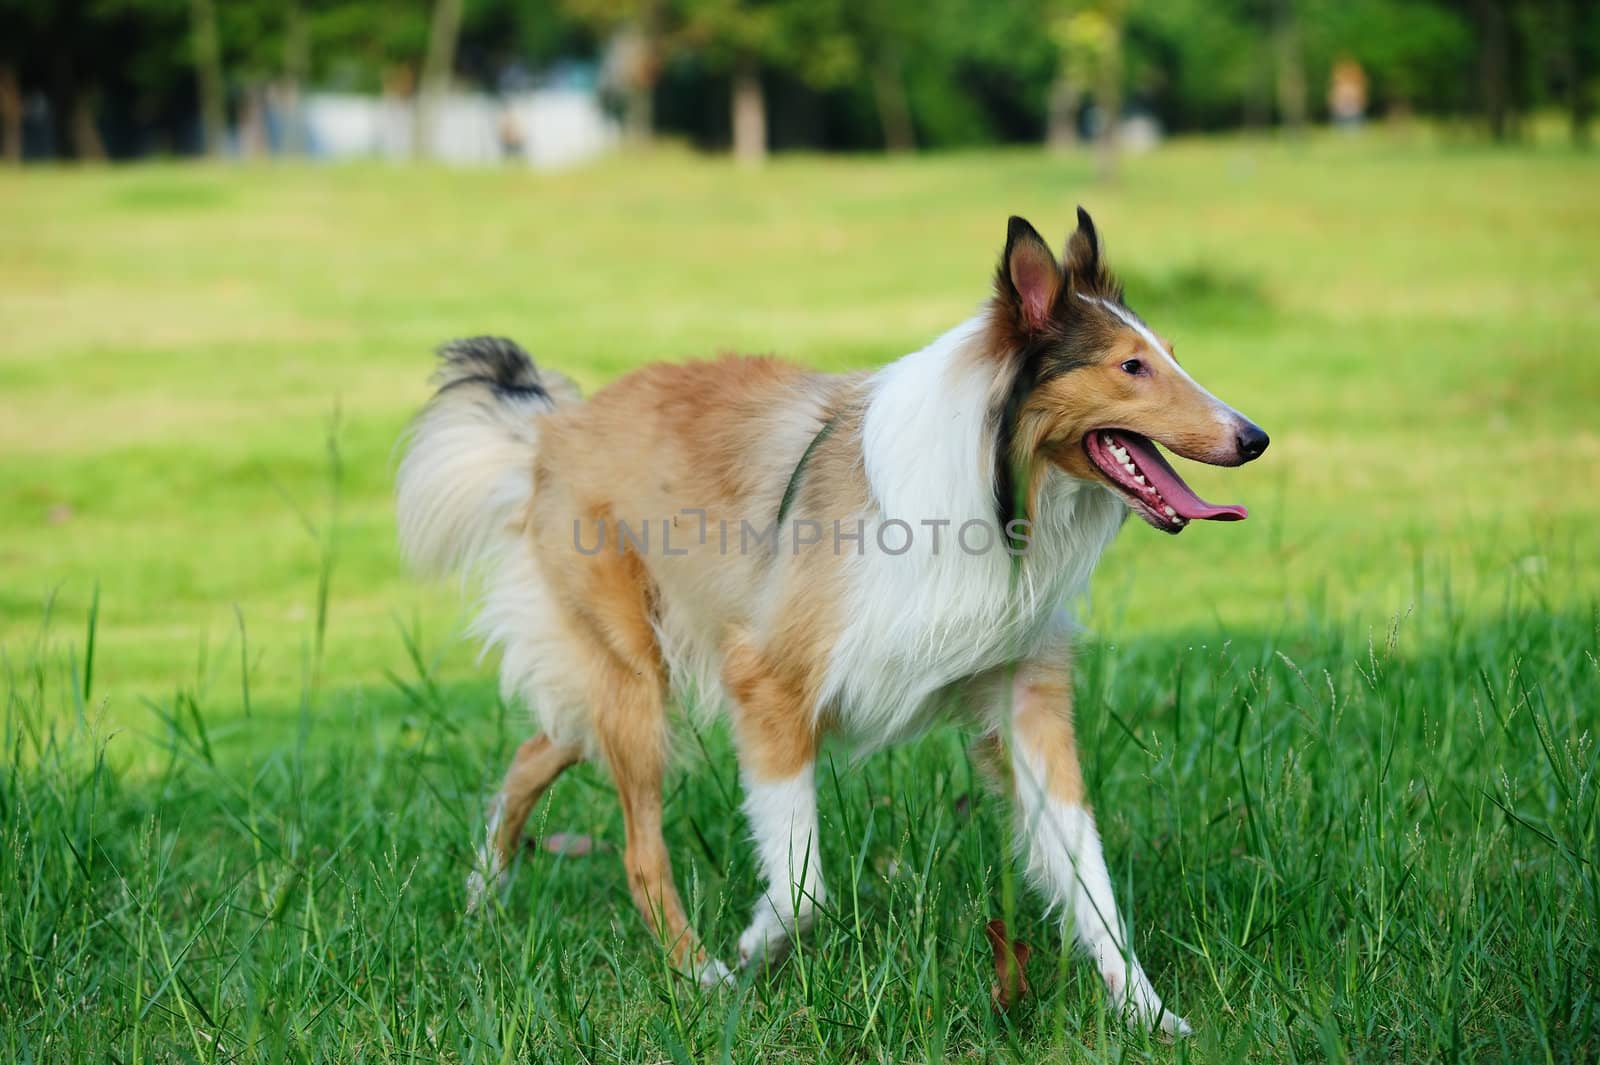 Collie rough dog running by raywoo